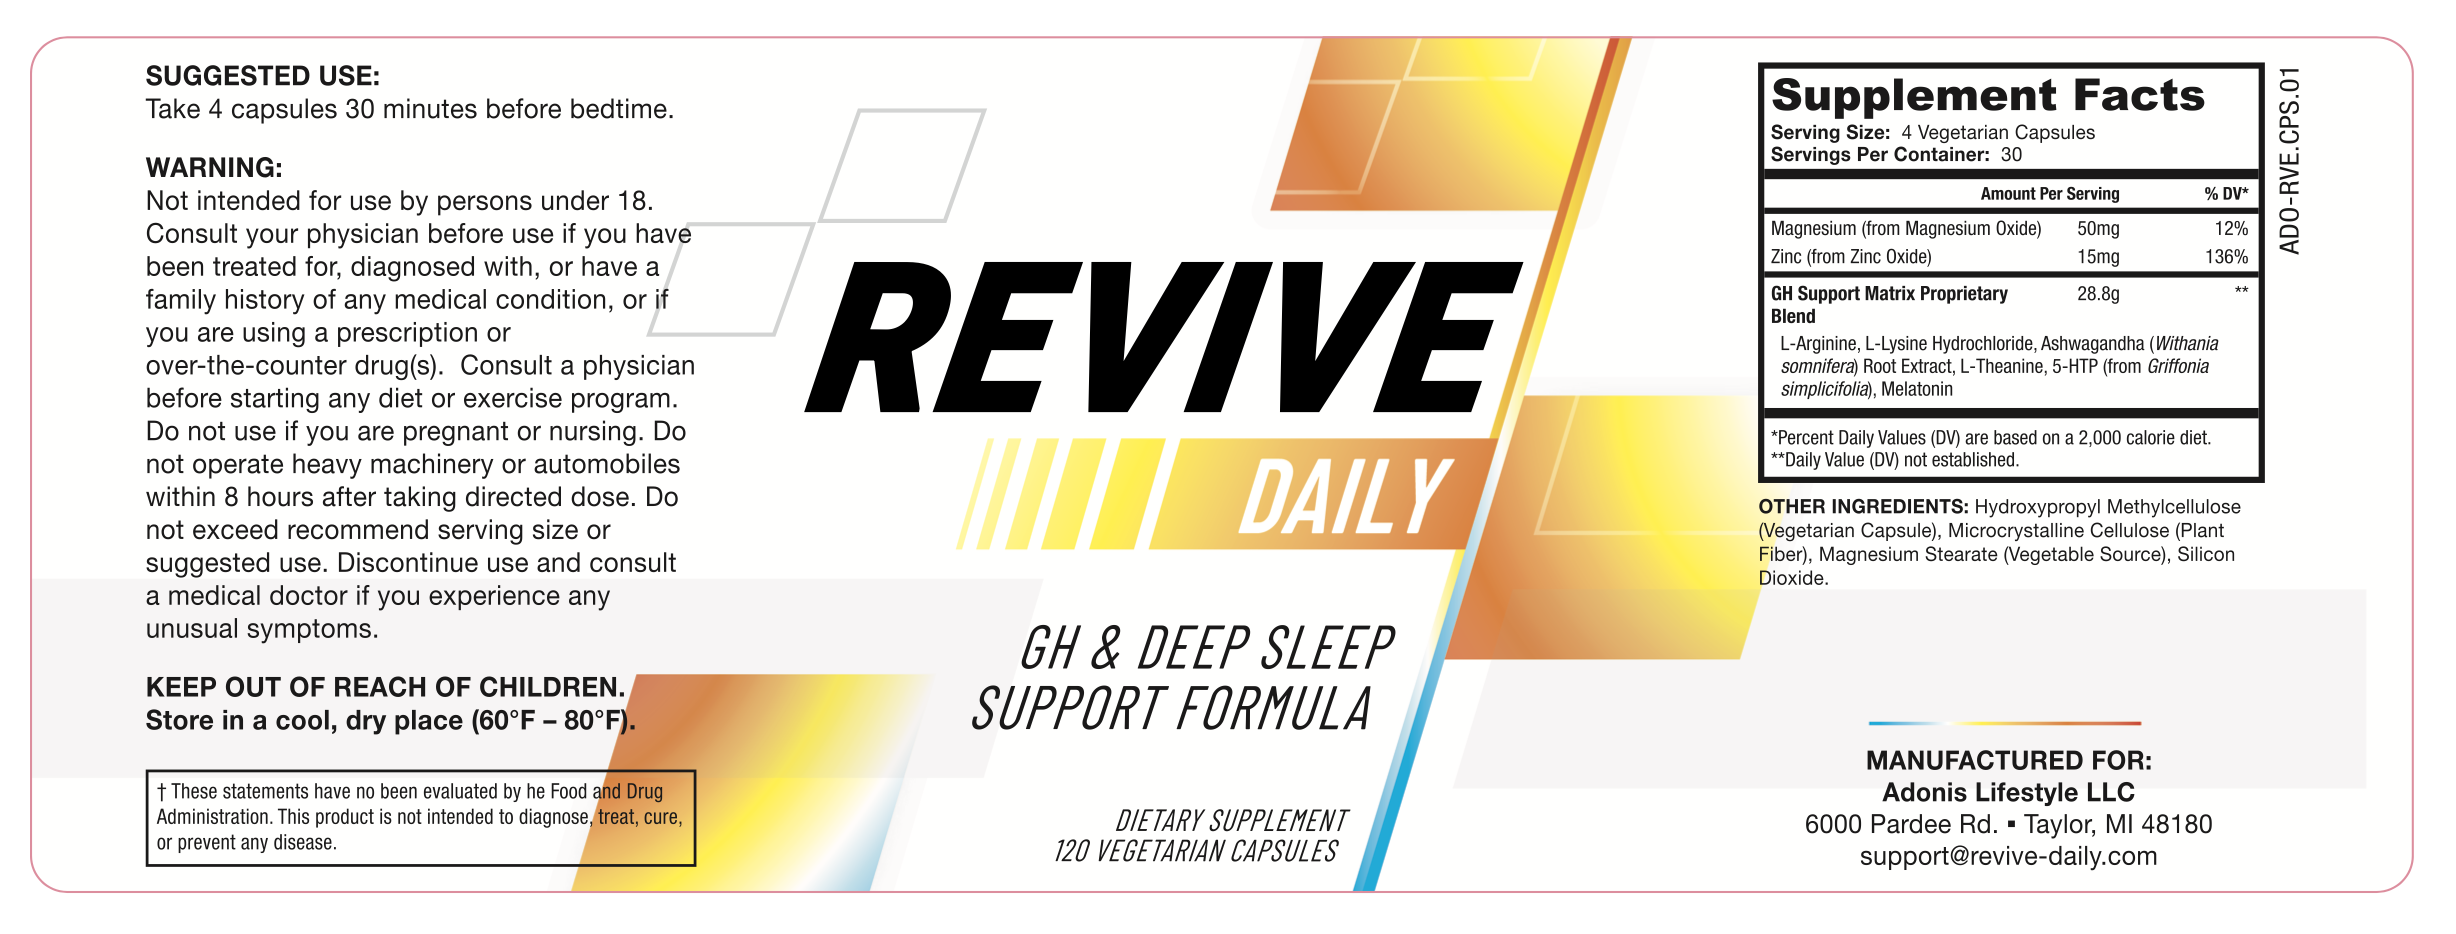 Revive Daily Ingredients Facts